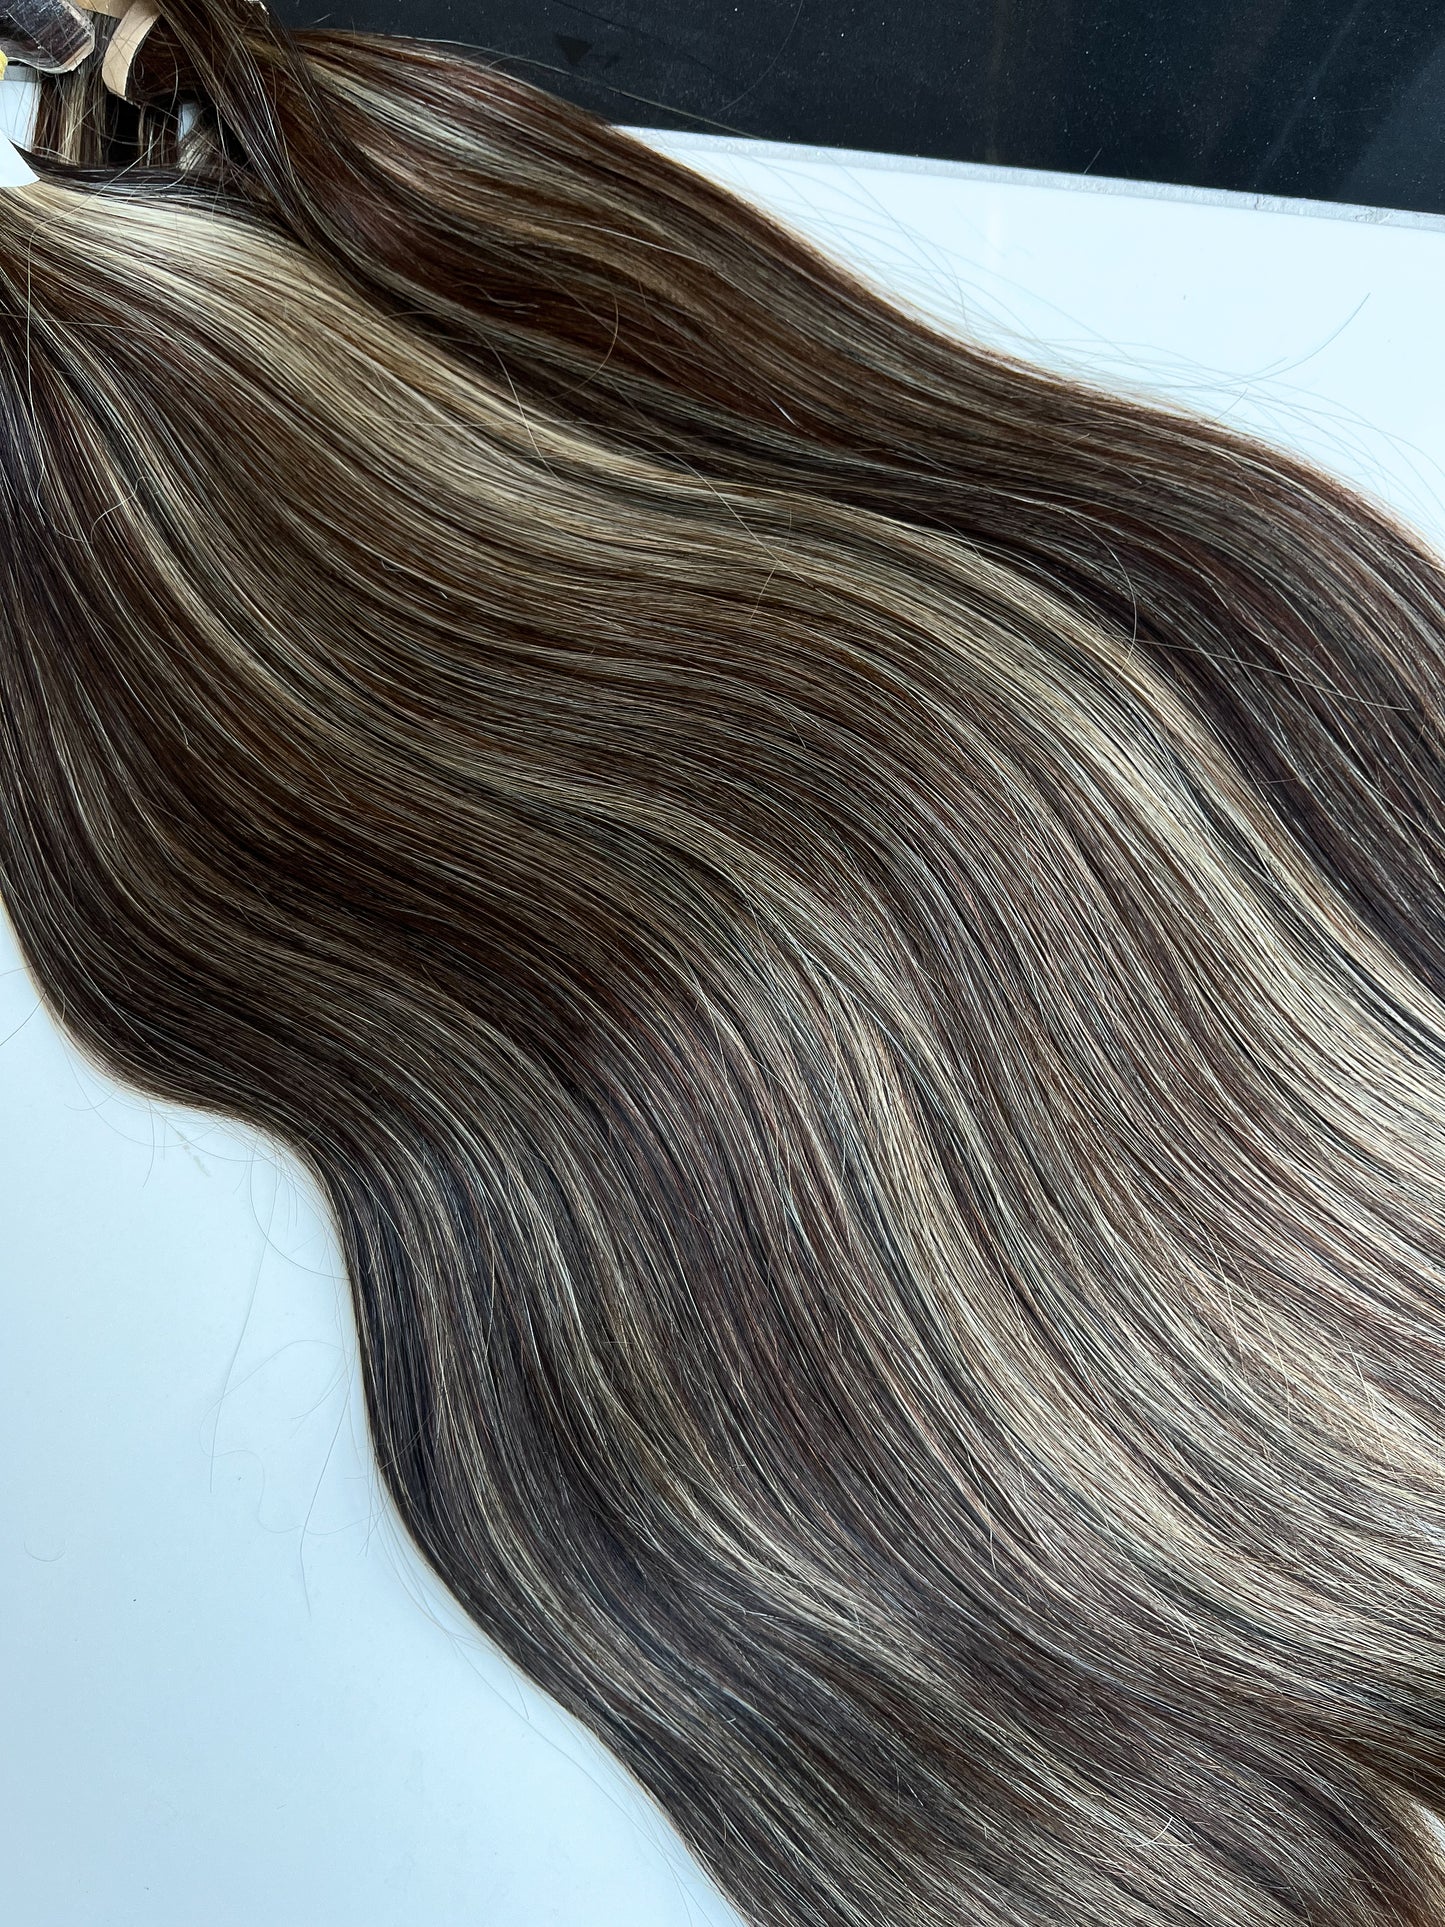 20” Tape in Hair Extensions - Shade Oreo 2/6/22 - Ladylux